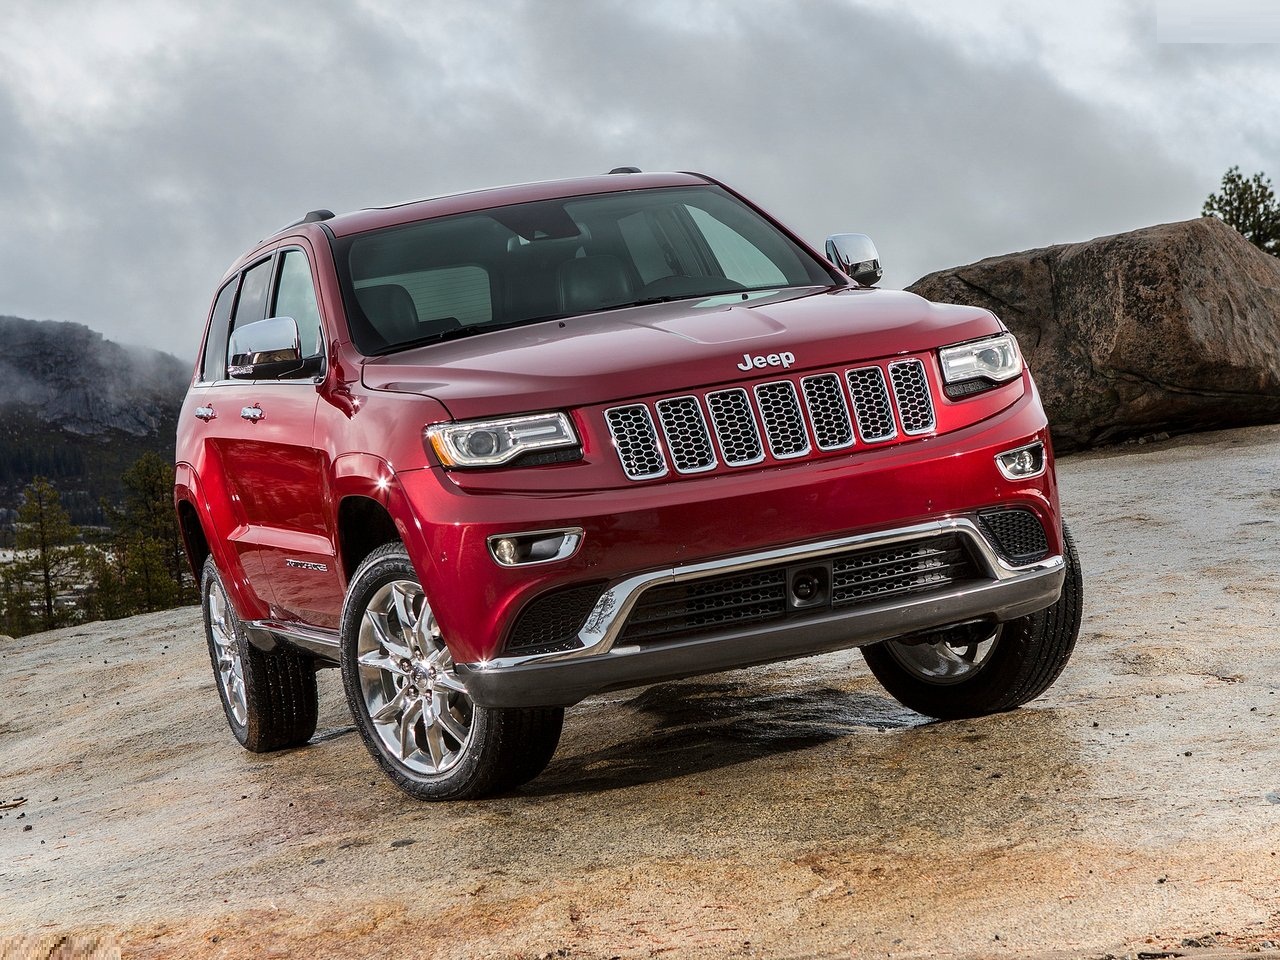 2014 Jeep Grand Cherokee   Wallpapers Pictures Pics Photos Images